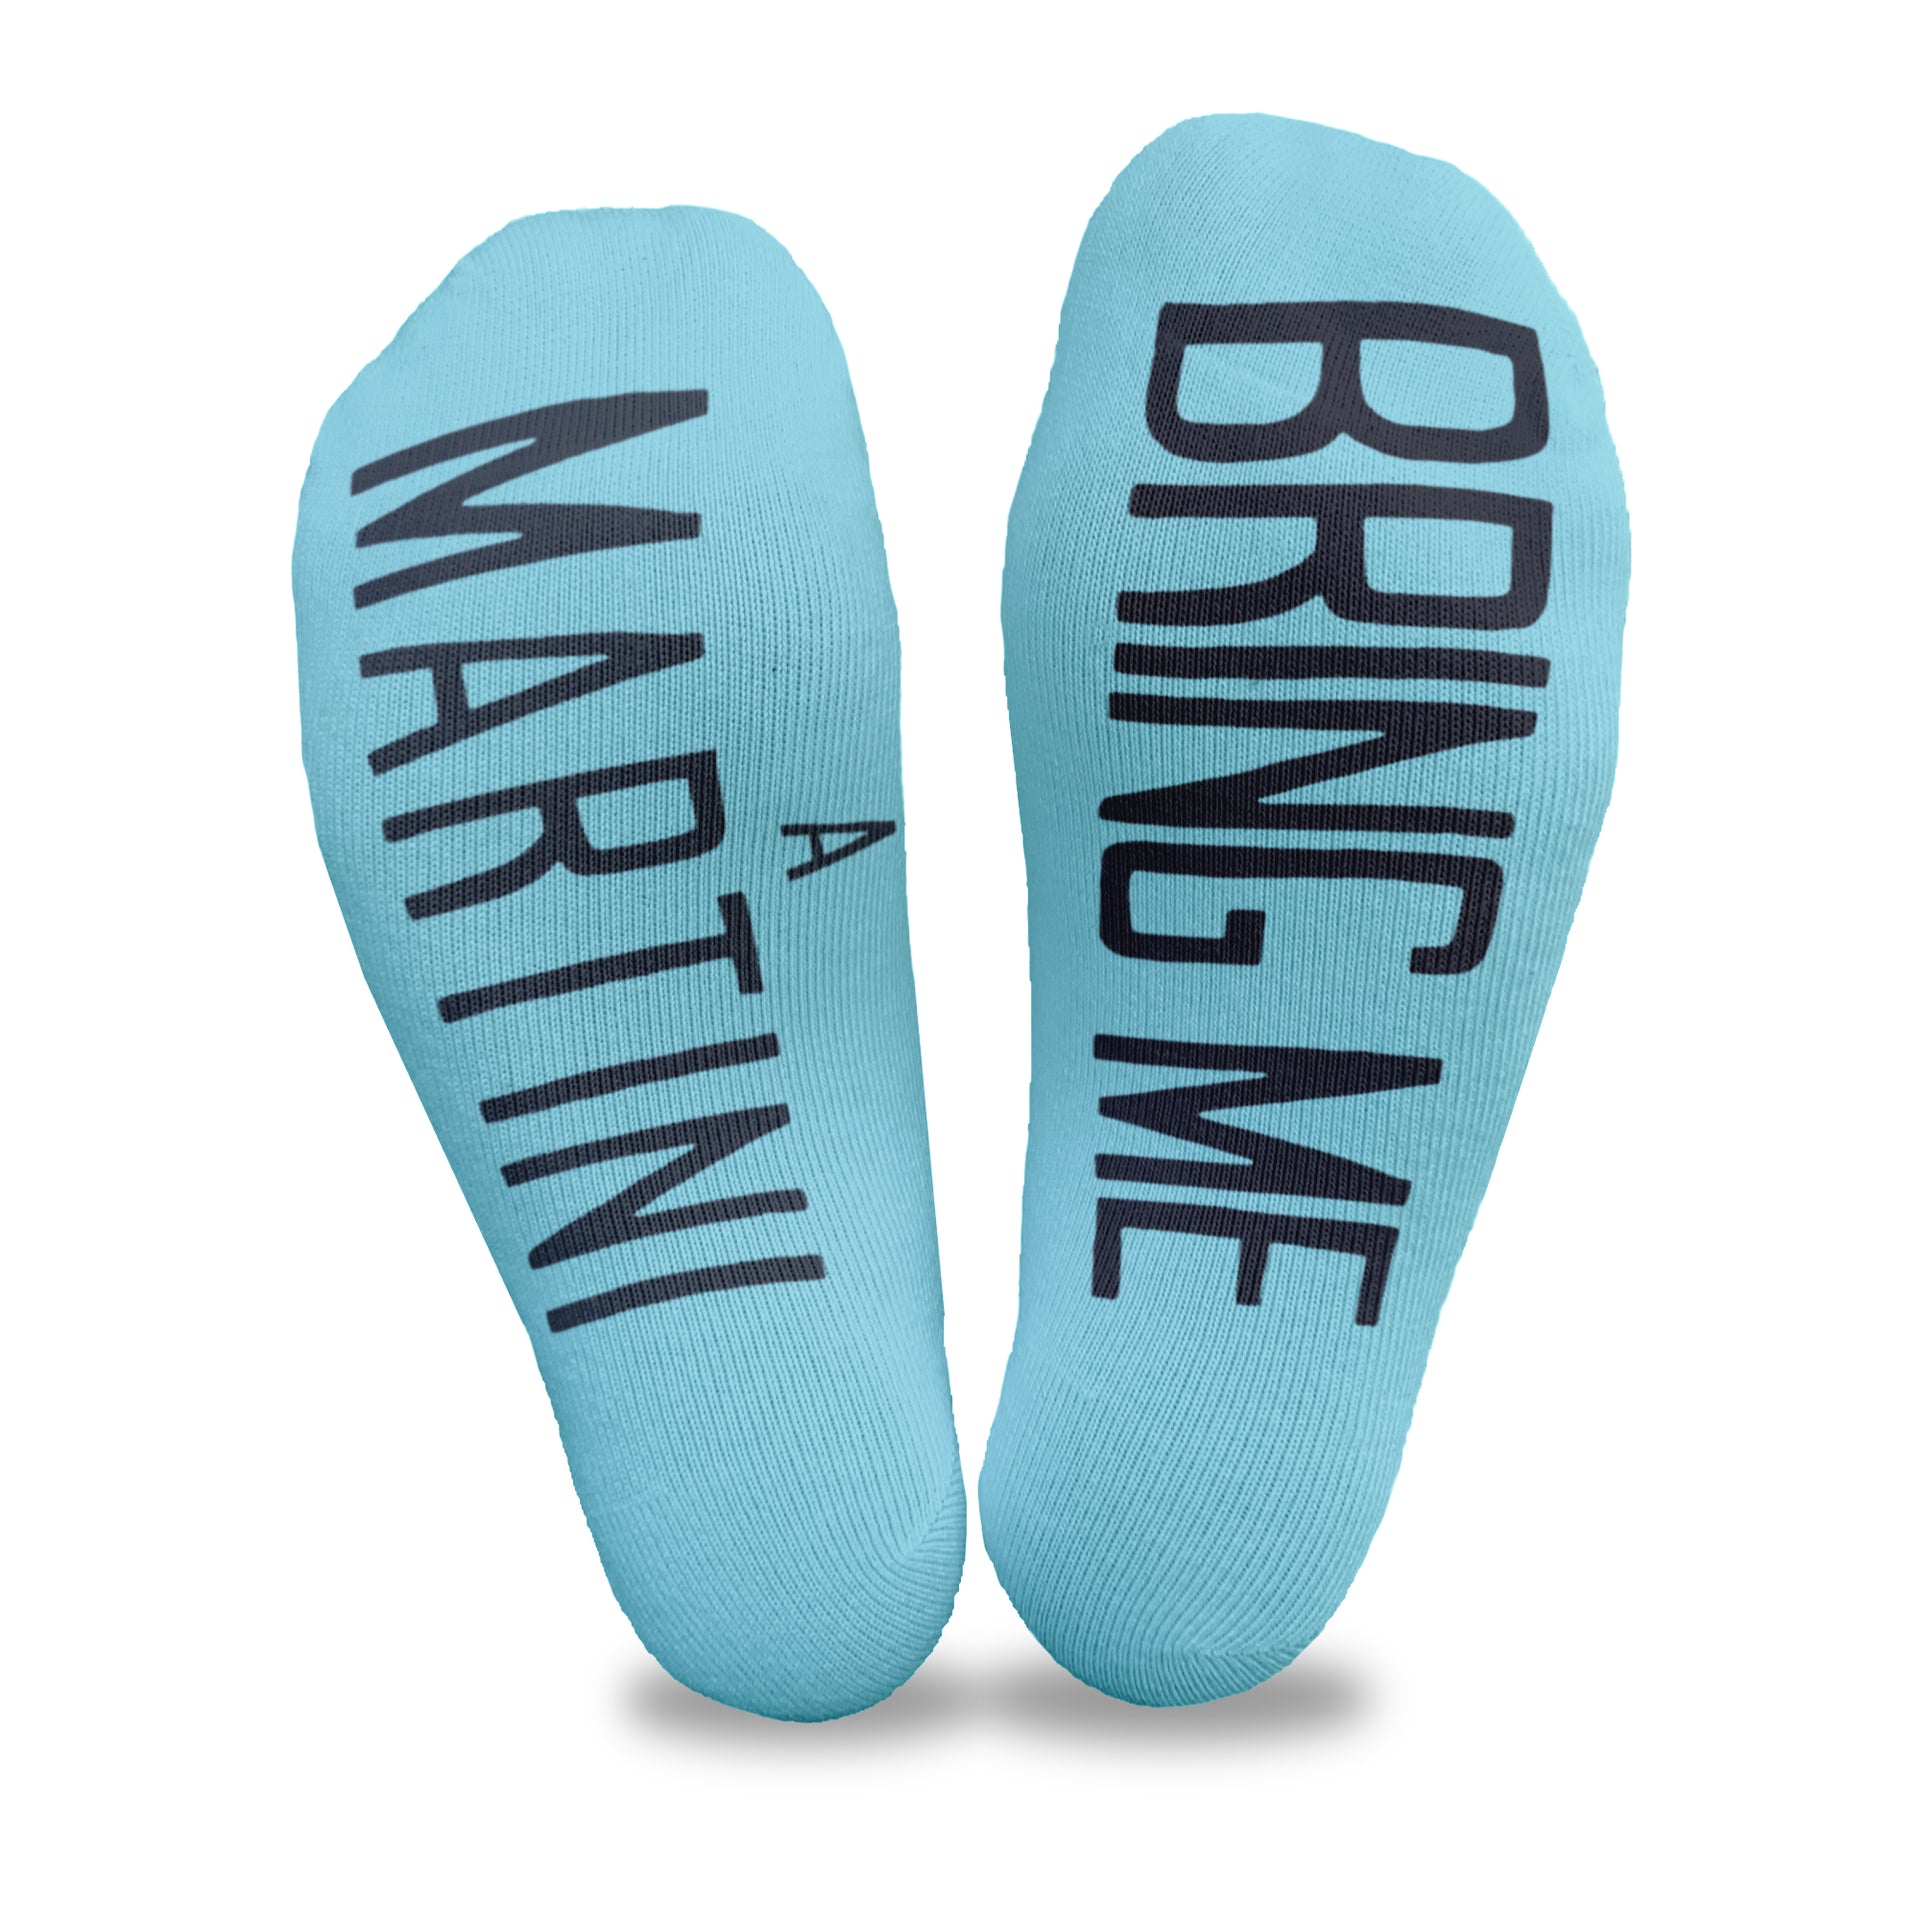 Bring me a martini custom printed on the soles of turquoise no show footie socks makes a fun way to ask your spouse for a drink.